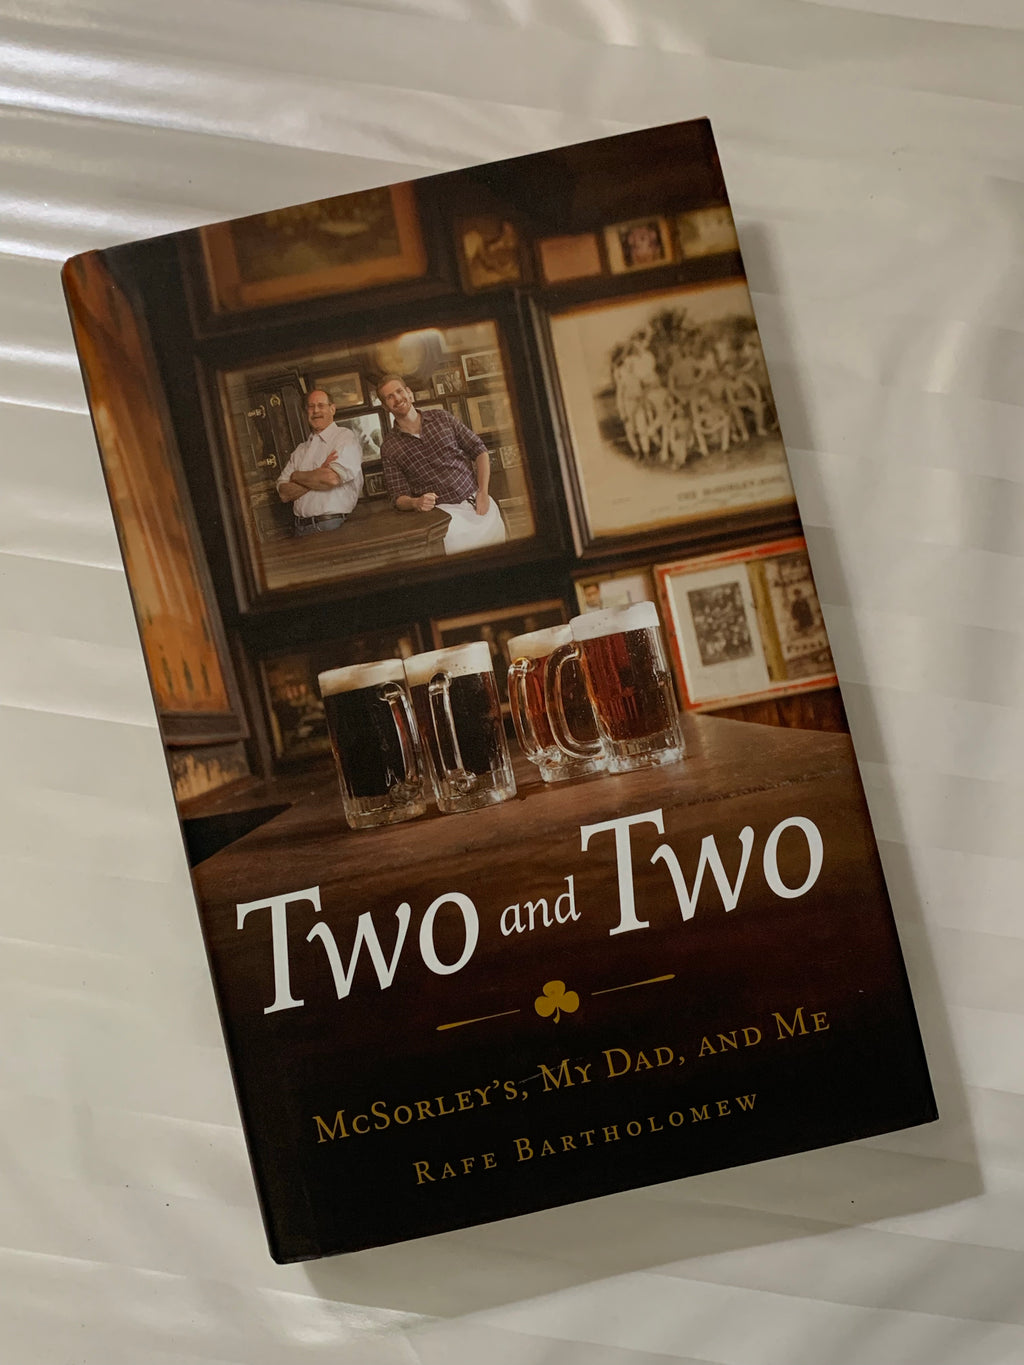 Two and Two: McSorley's, My Dad, and Me- By Rafe Bartholomew